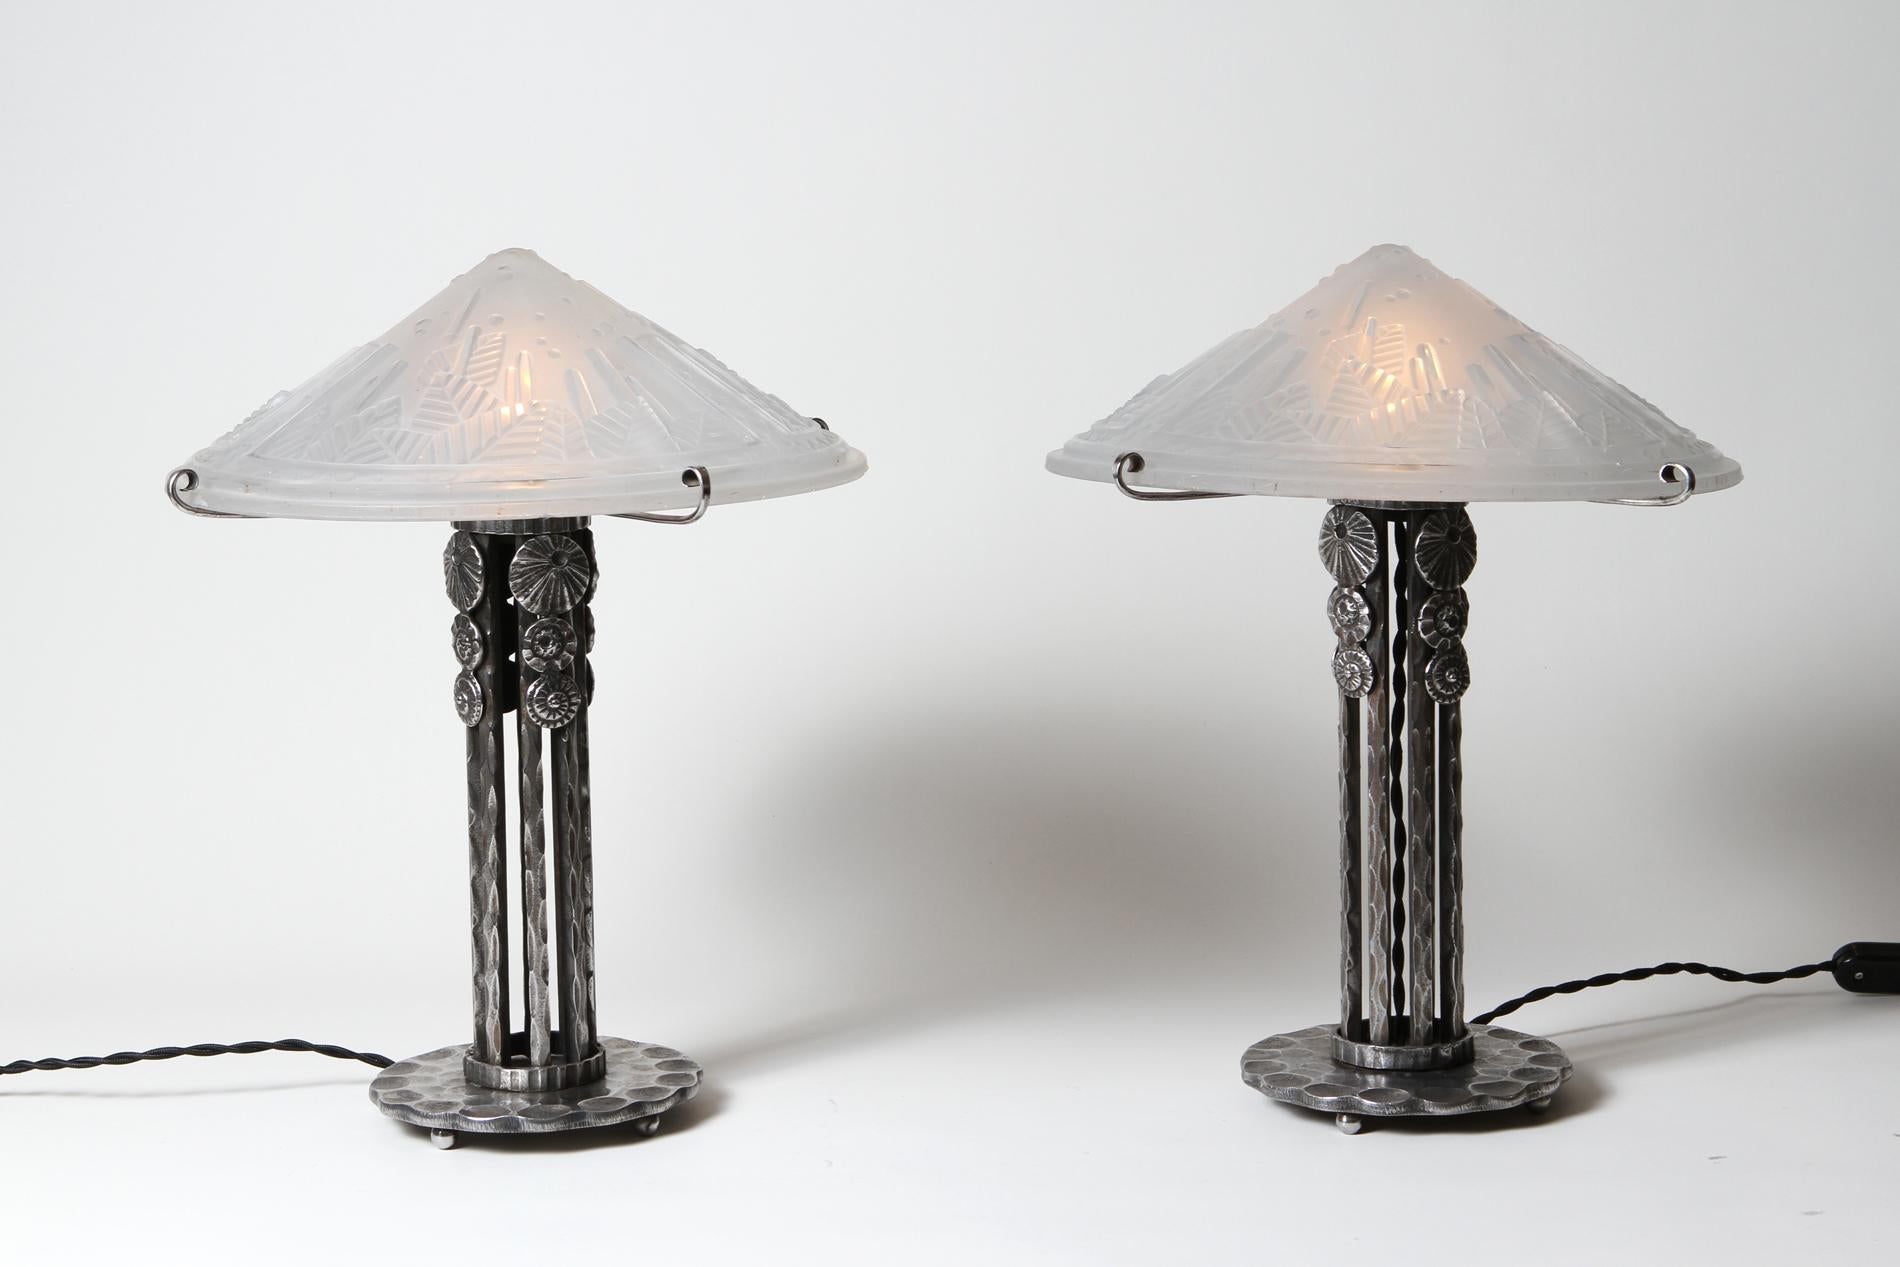 Original pair of French Art Deco table lamps by Muller frères and wrought iron base made by M.VASSEUR member of the wrought iron group 